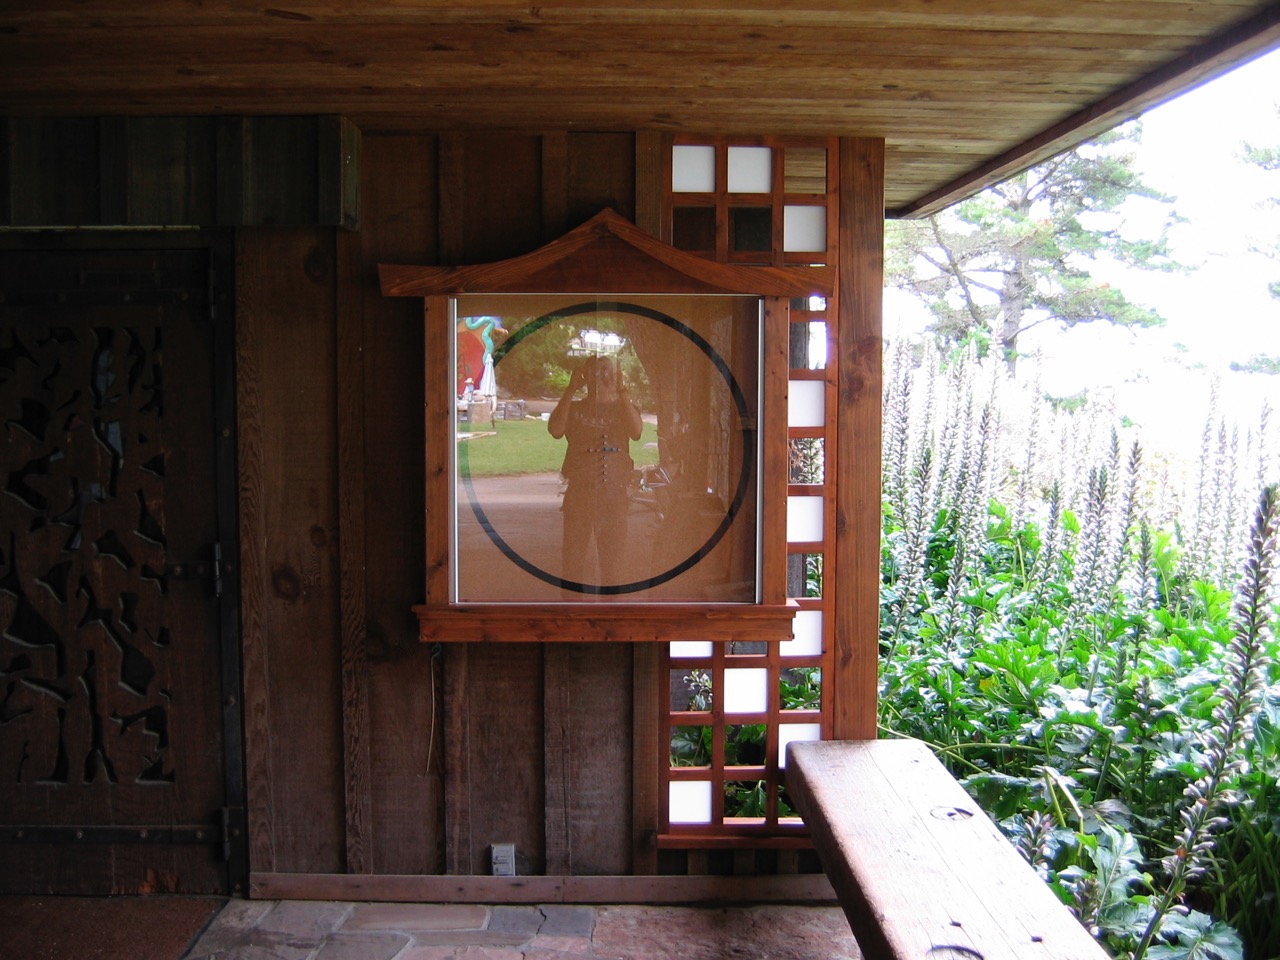 Japanese style screen and display case